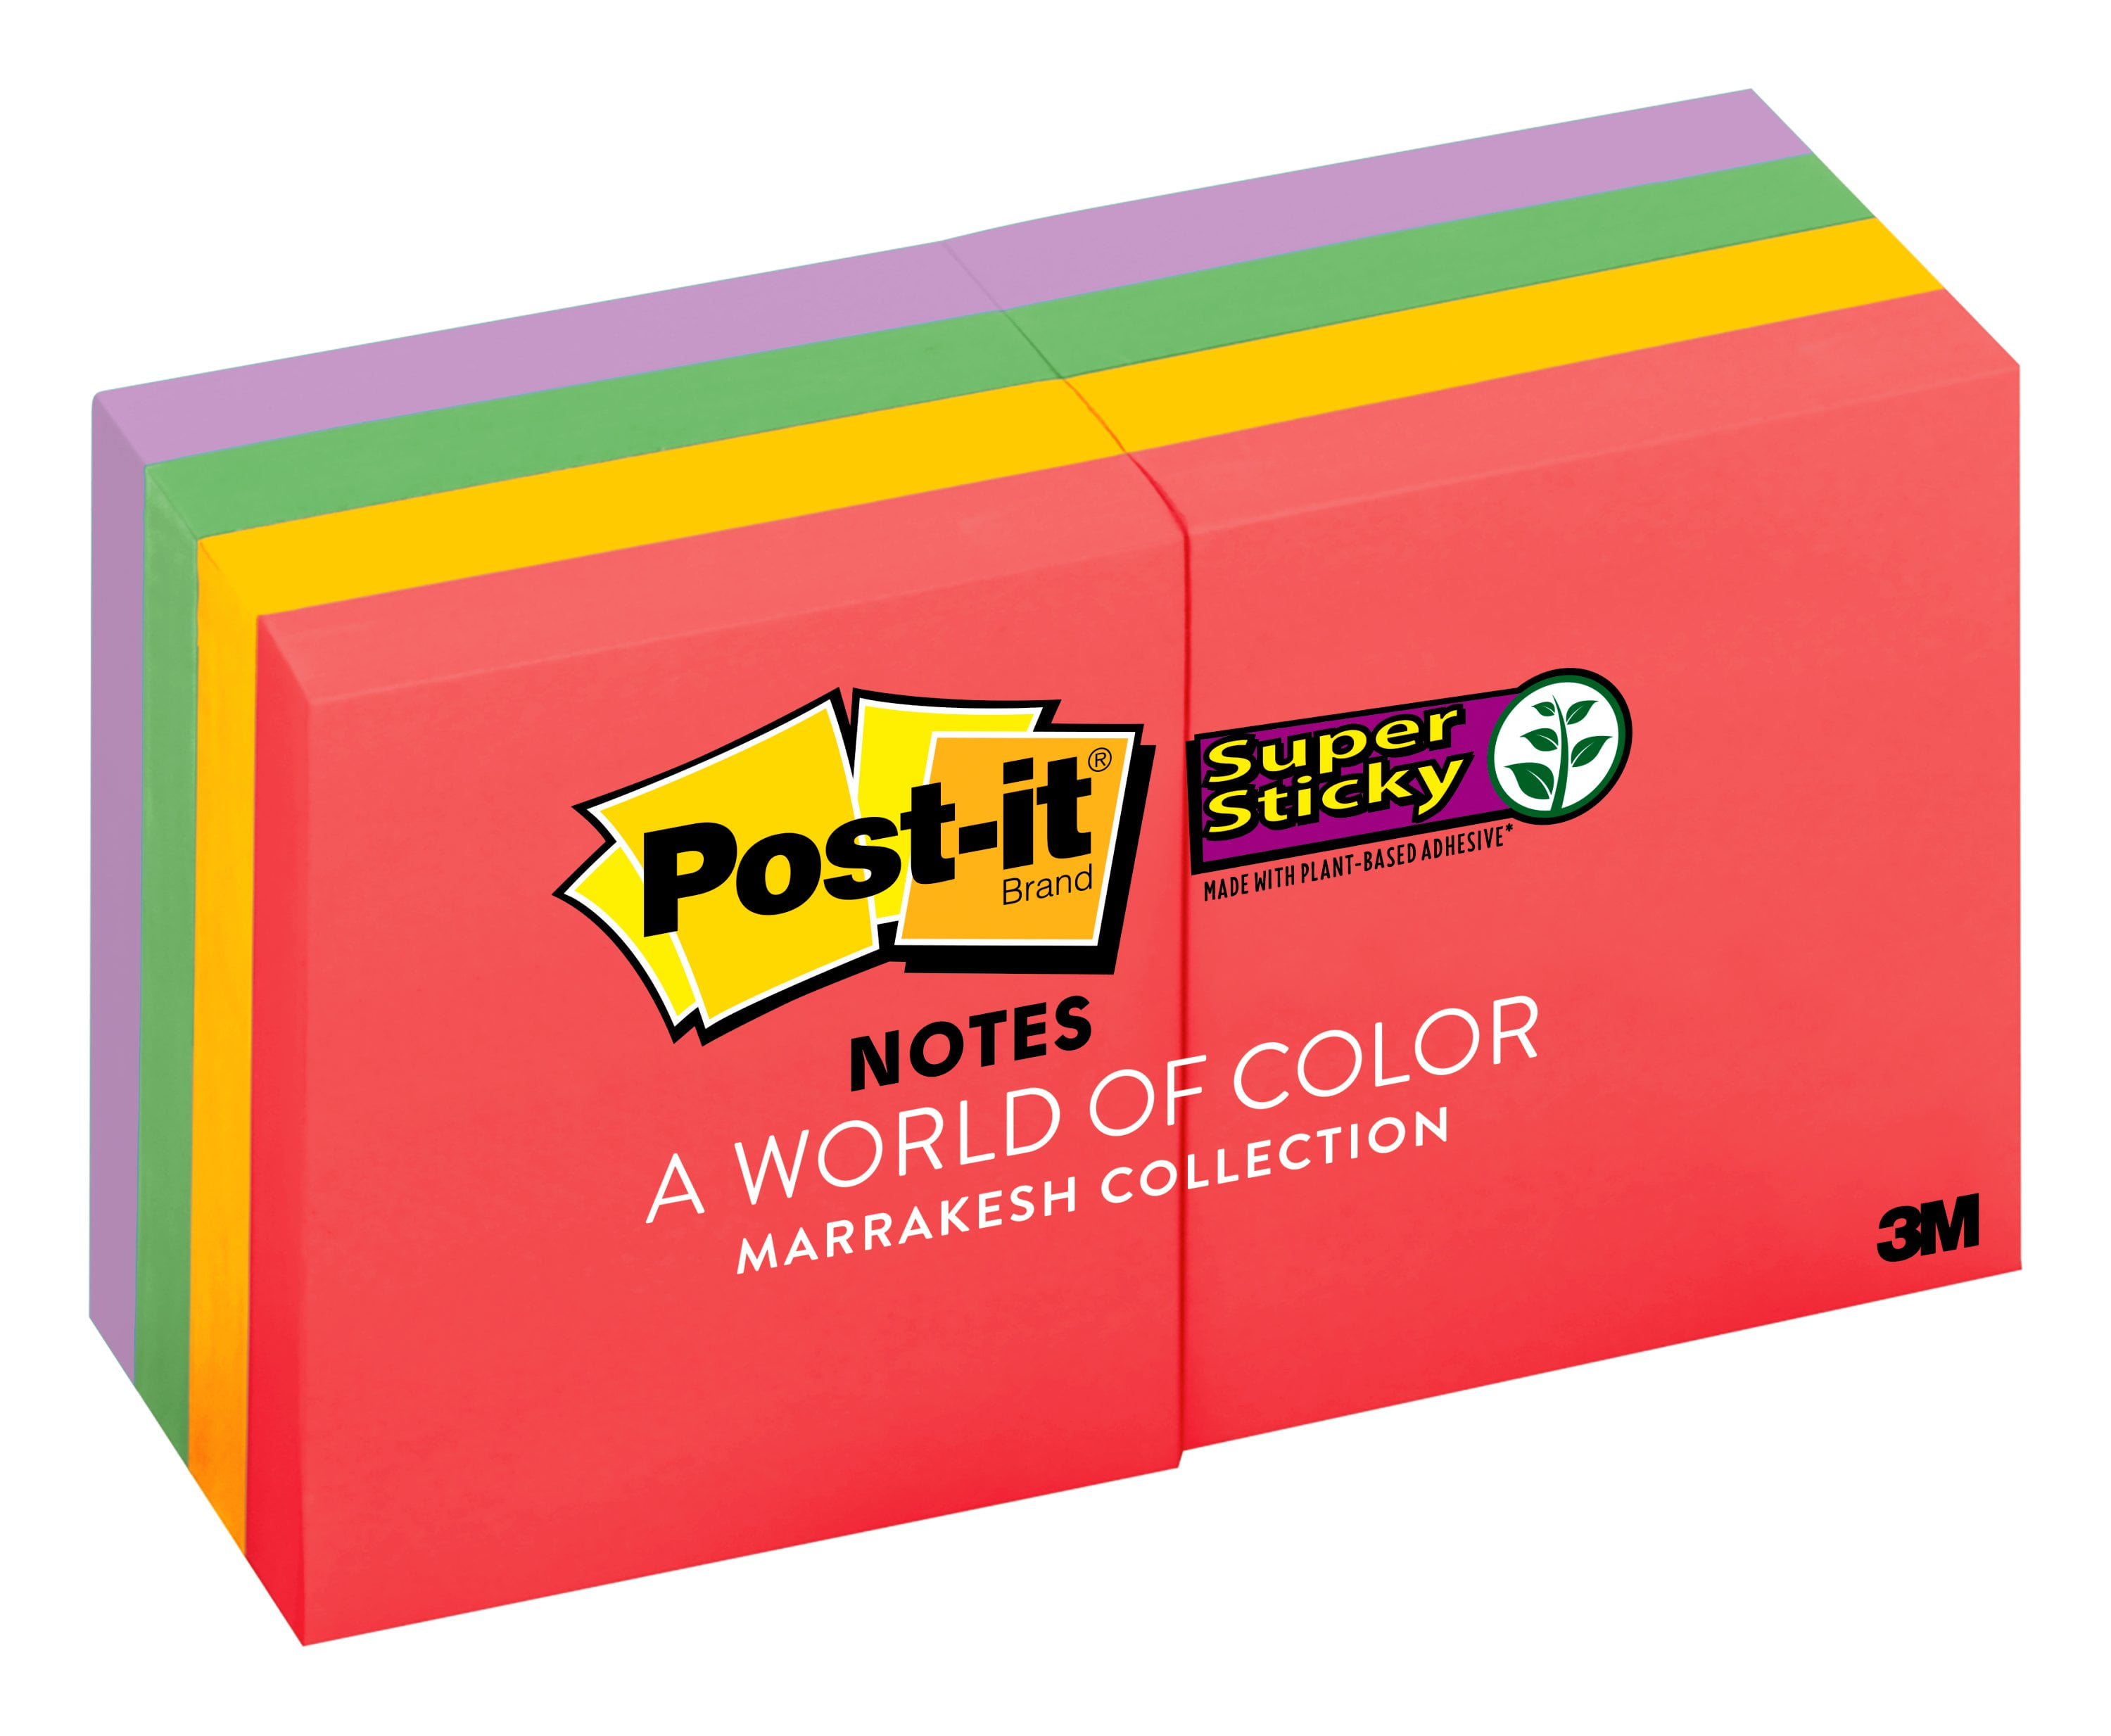 Post-it Notes Super Sticky 6756SSAN Pads in Marrakesh Colors, Lined, 4 x 4,  90-Sheet, 6/Pack - 675-6SSAN